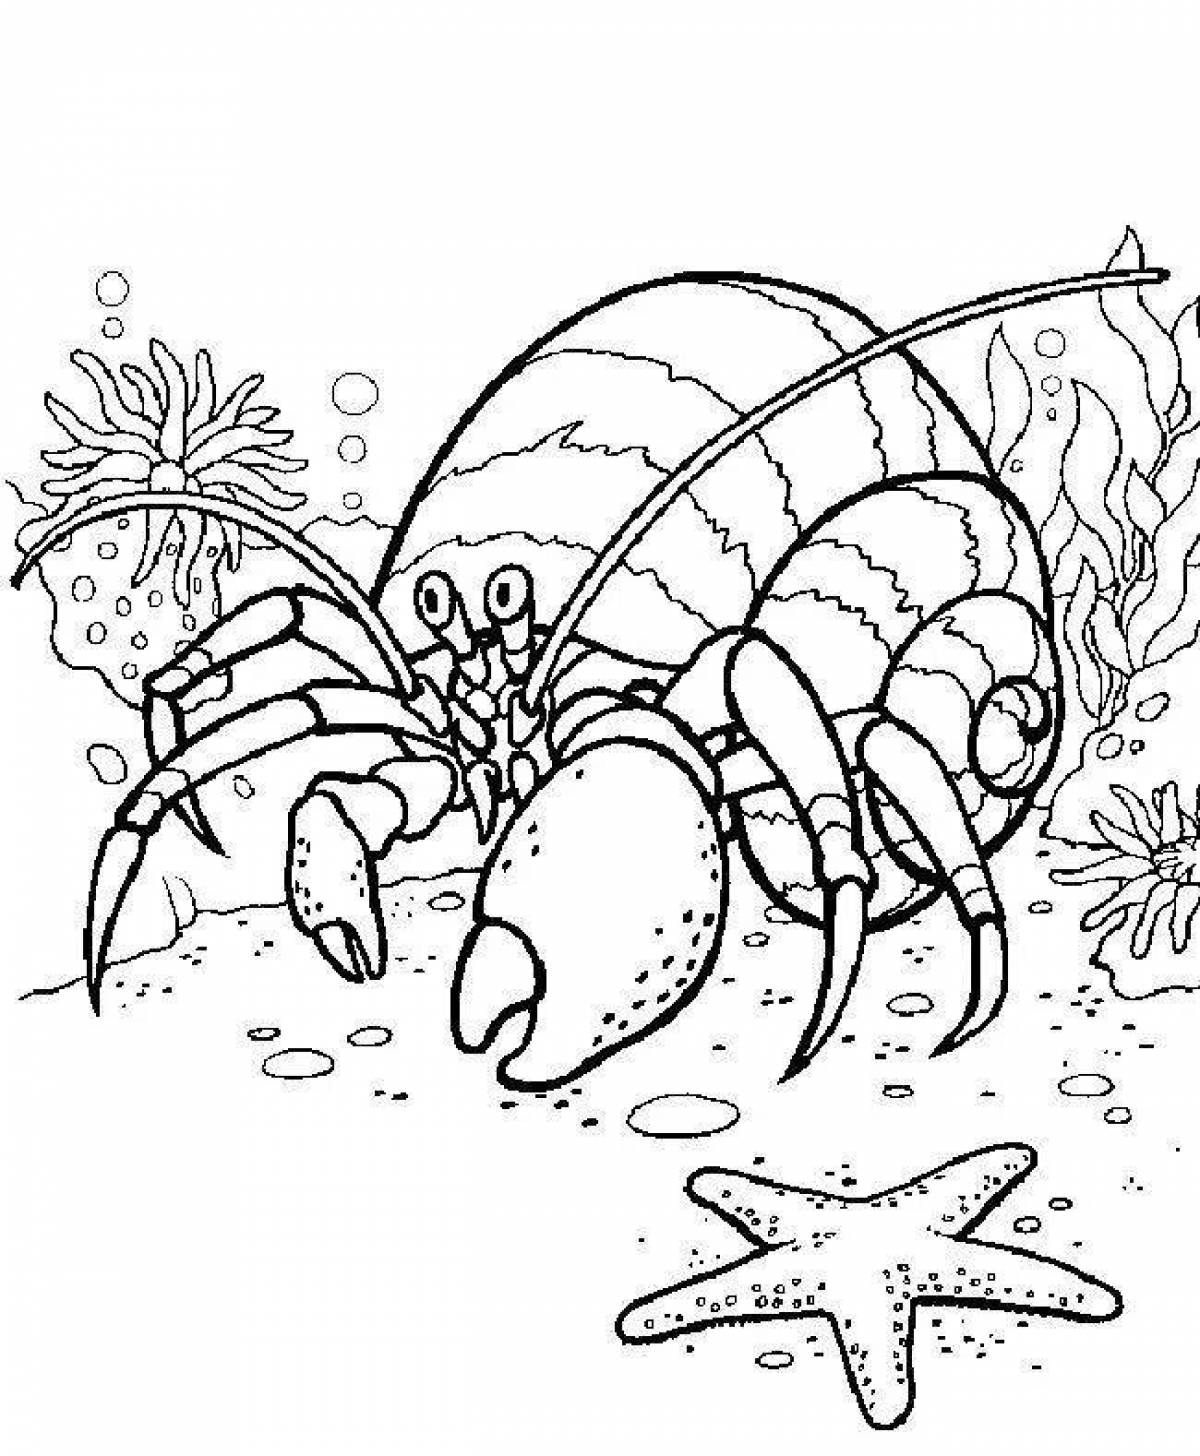 Coloring page nice hermit crab